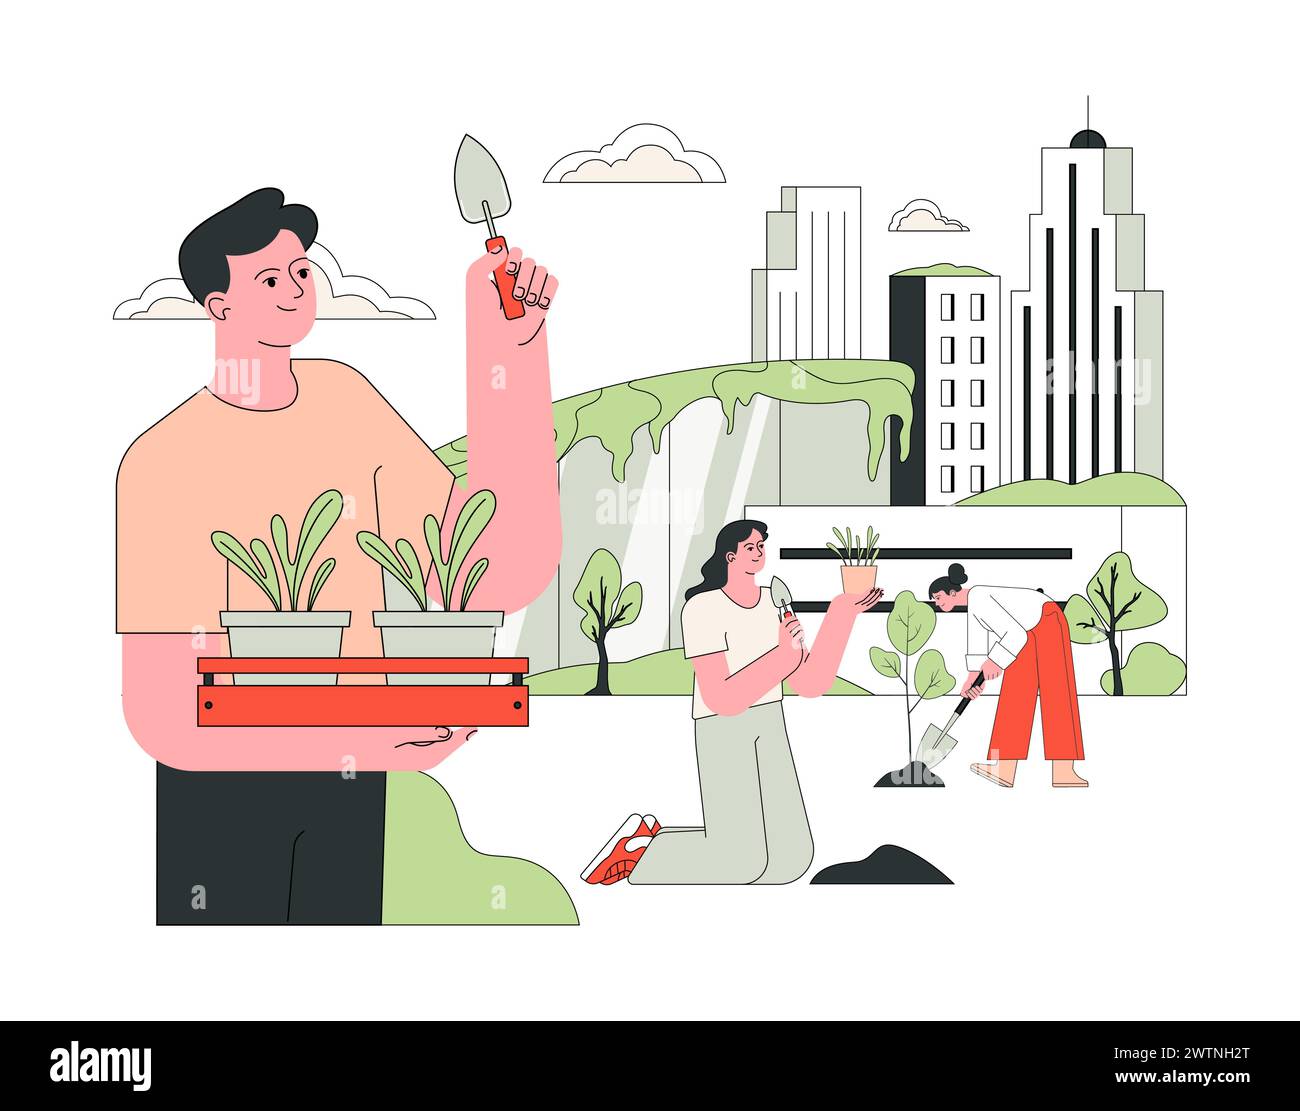 Air quality awareness. Urban greening. People engaging in urban landscaping and planting to improve air quality index in a city environment. Flat vector illustration. Stock Vector